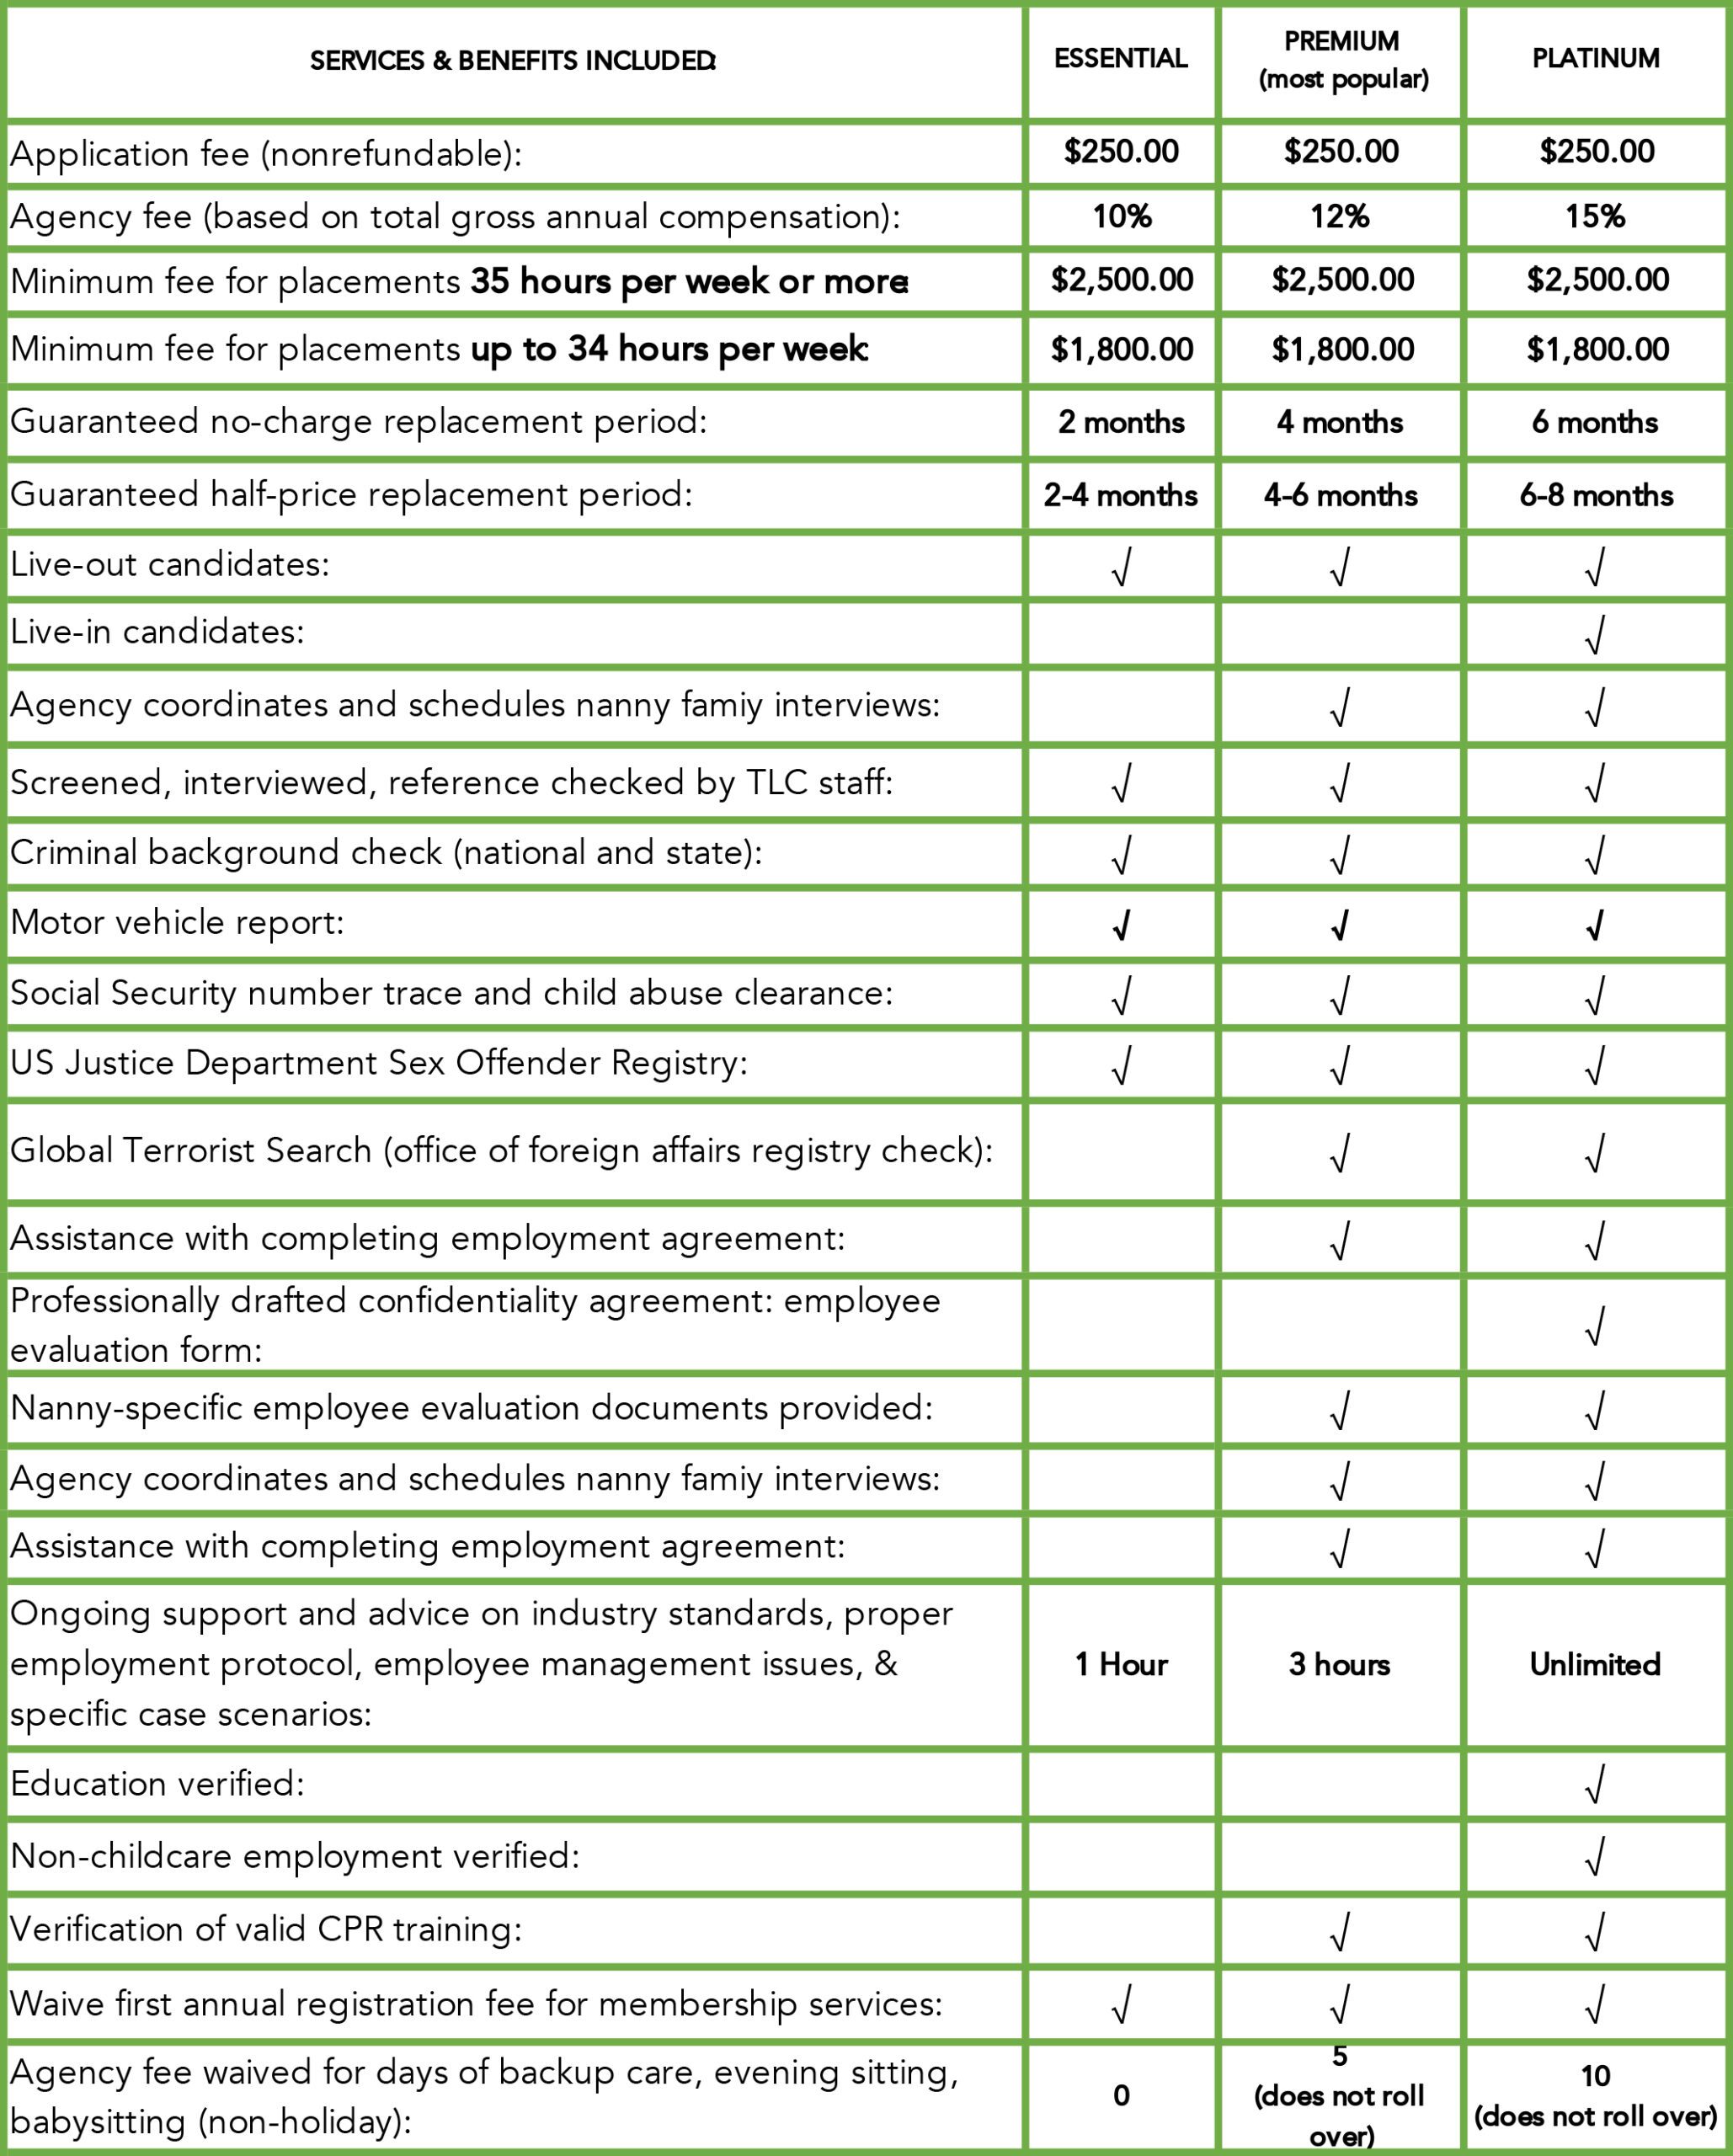 pricing-matrix-for-worpress-pricing-page-07-2020-tlc-family-care